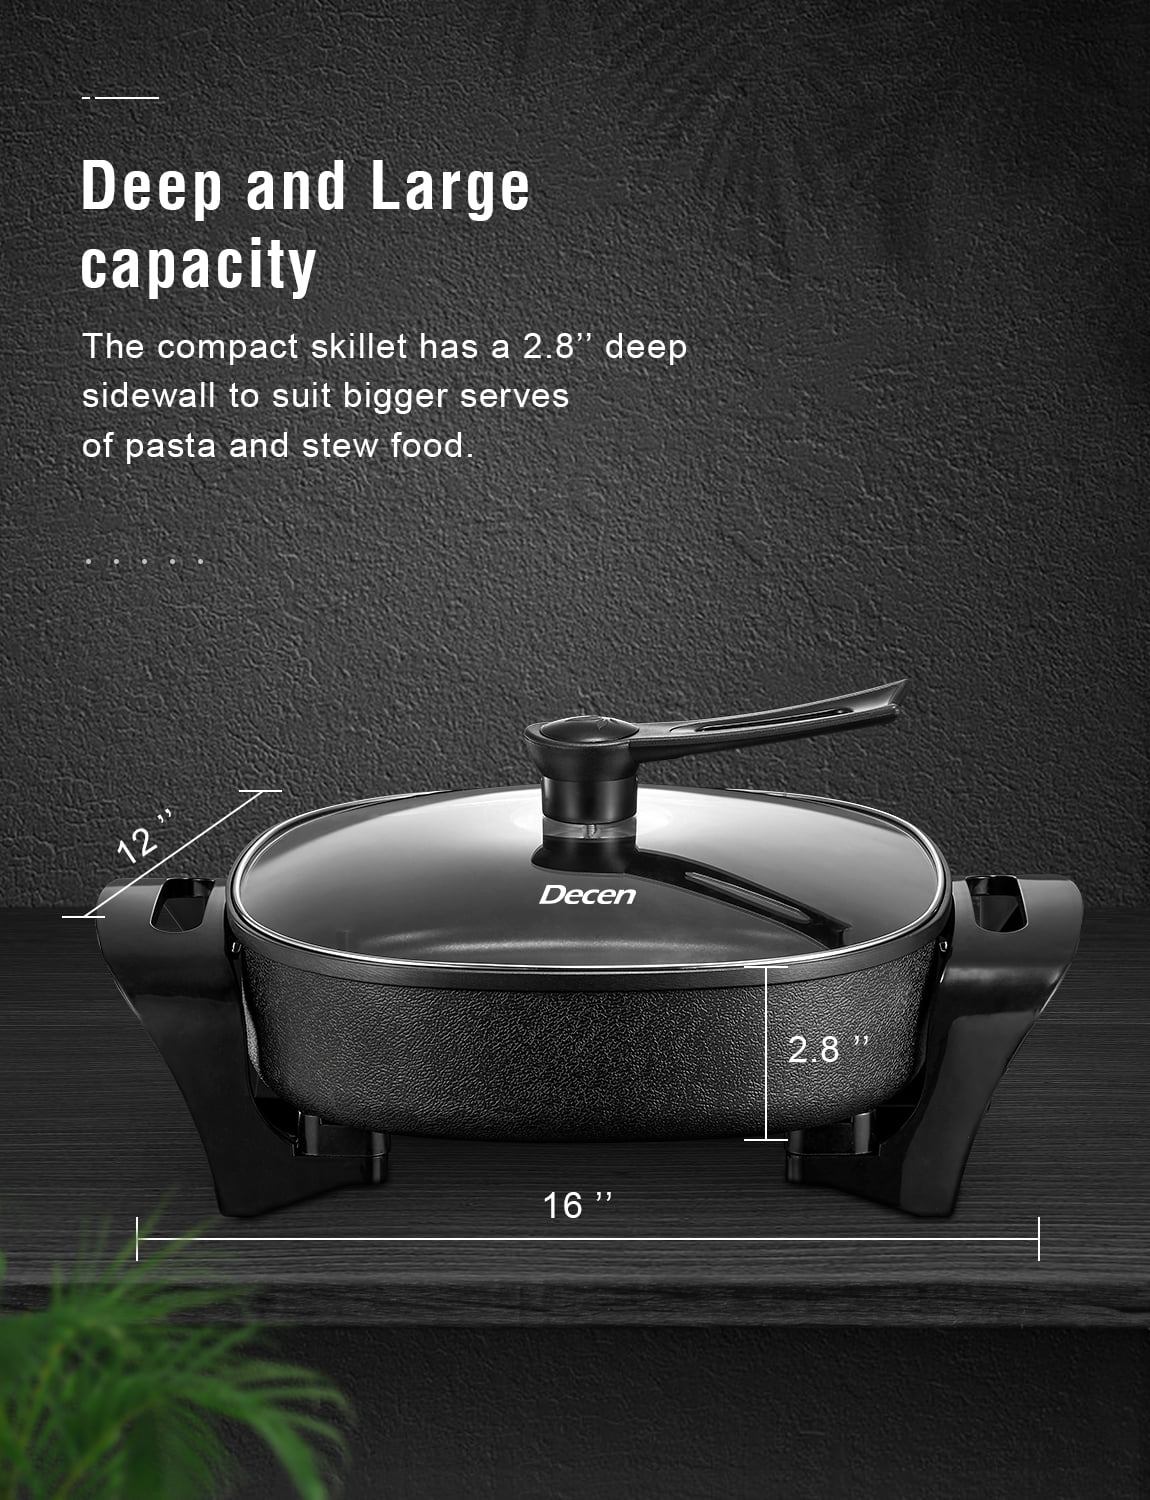 FOHERE Electric Skillet,12 Inch Deep Non Stick,Standable Glass Lid